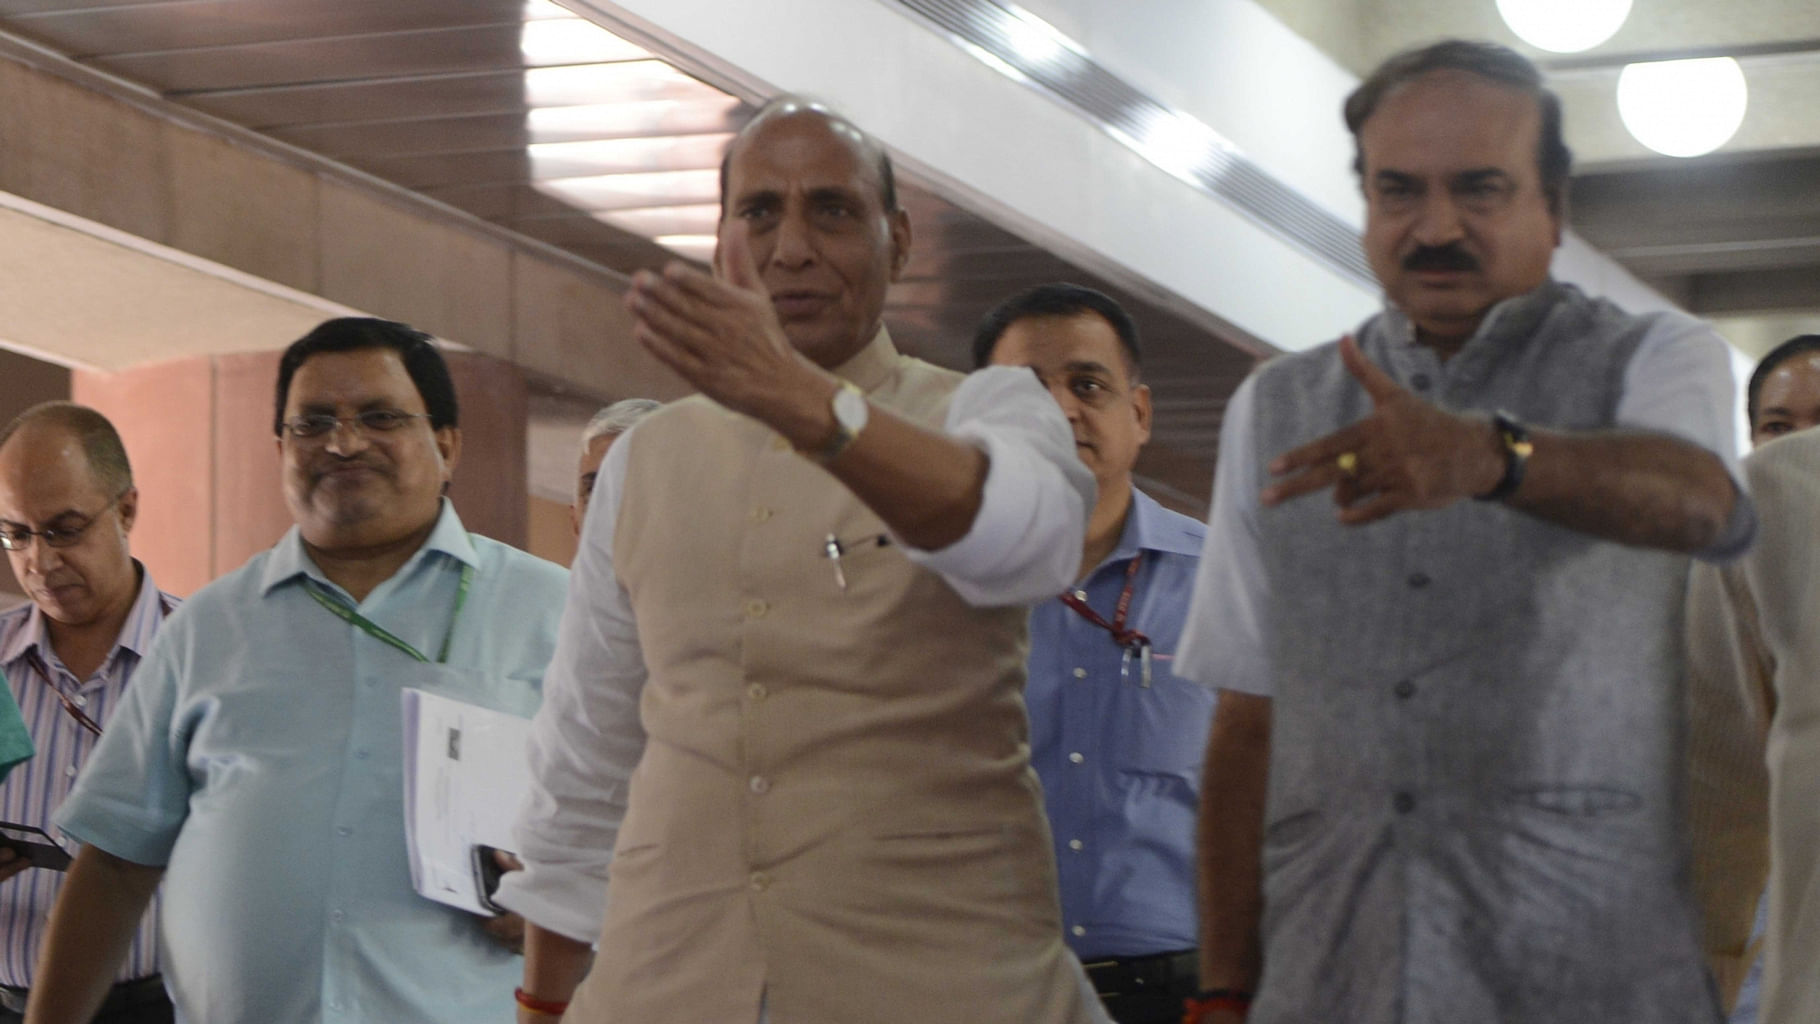 The delegation also made a fresh pledge for denouncing violence in the valley. (Photo: IANS)